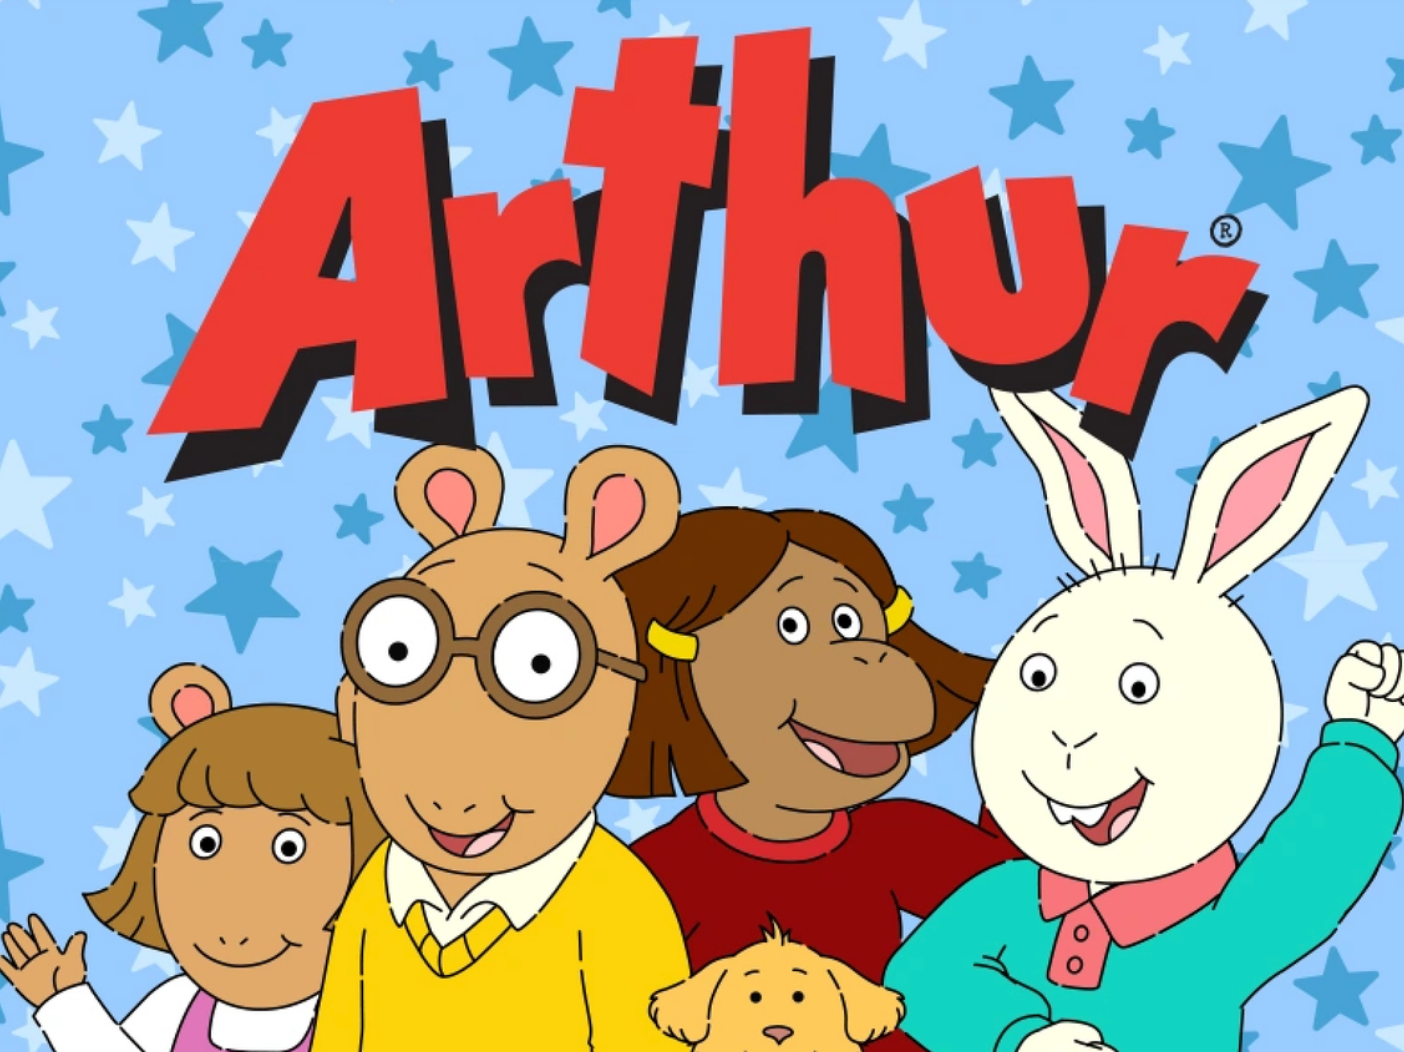 Have You Ever Wondered Who Arthur and His Friends Are? !